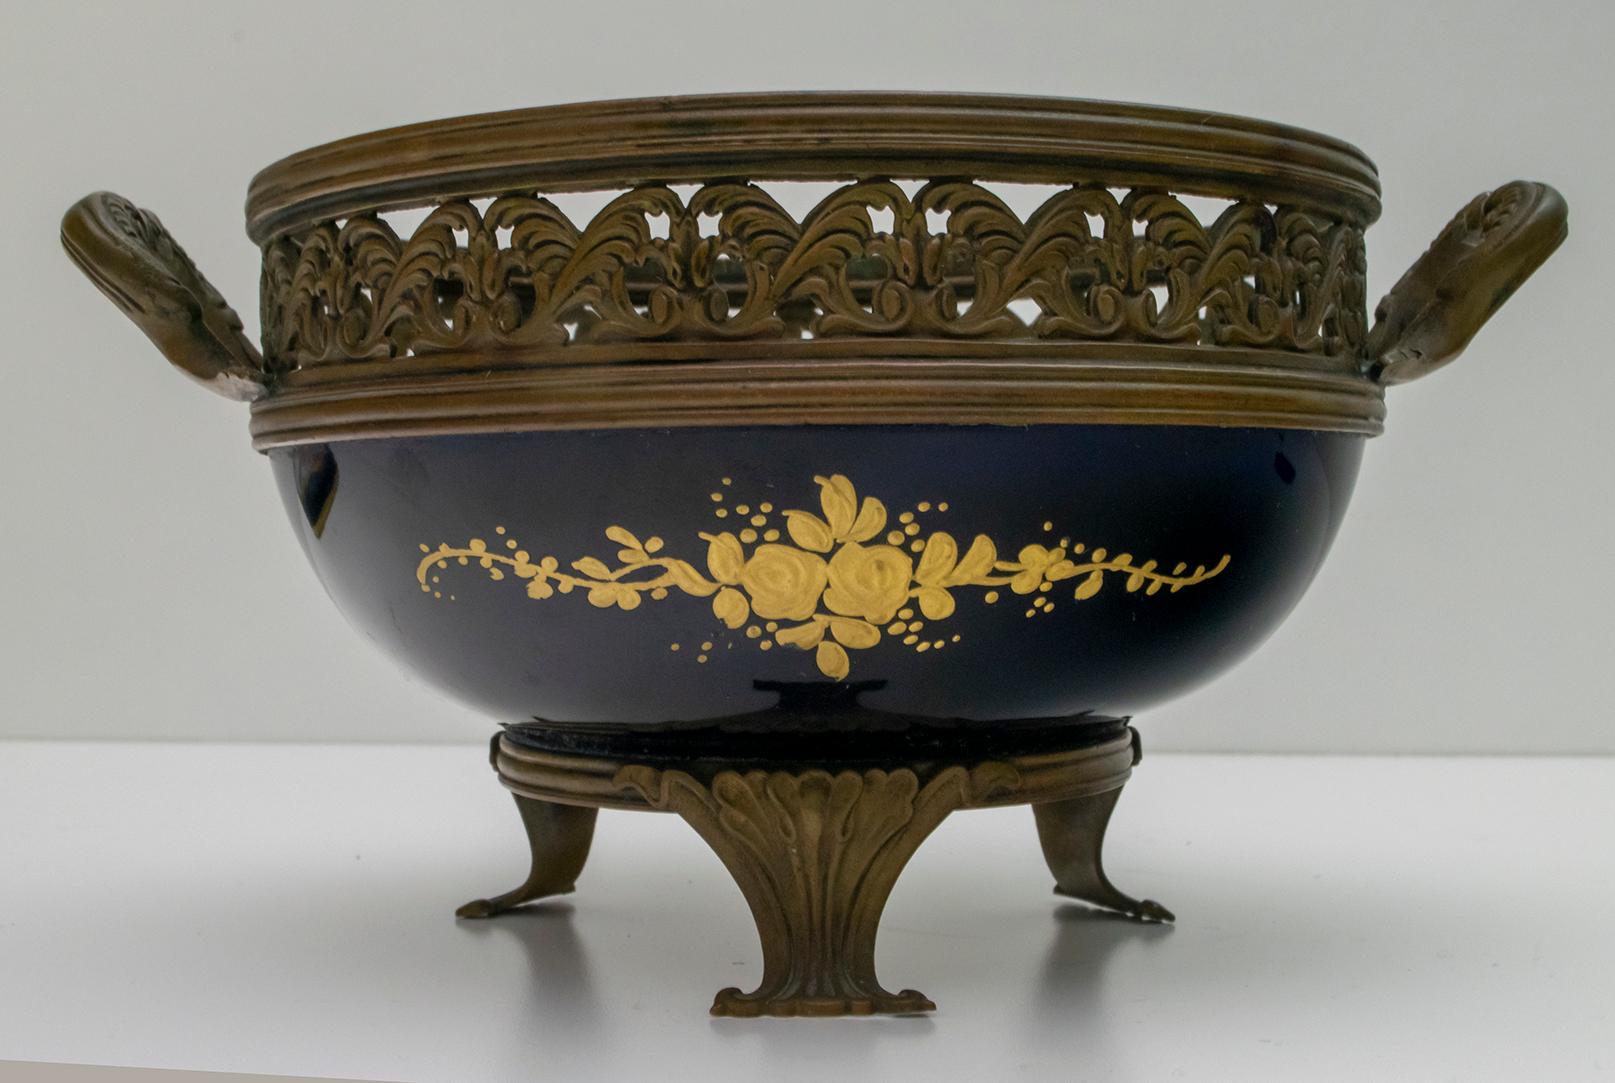 Signed E. Froger 19th Century French Porcelain Potpourri by Sevres, 1880 For Sale 10